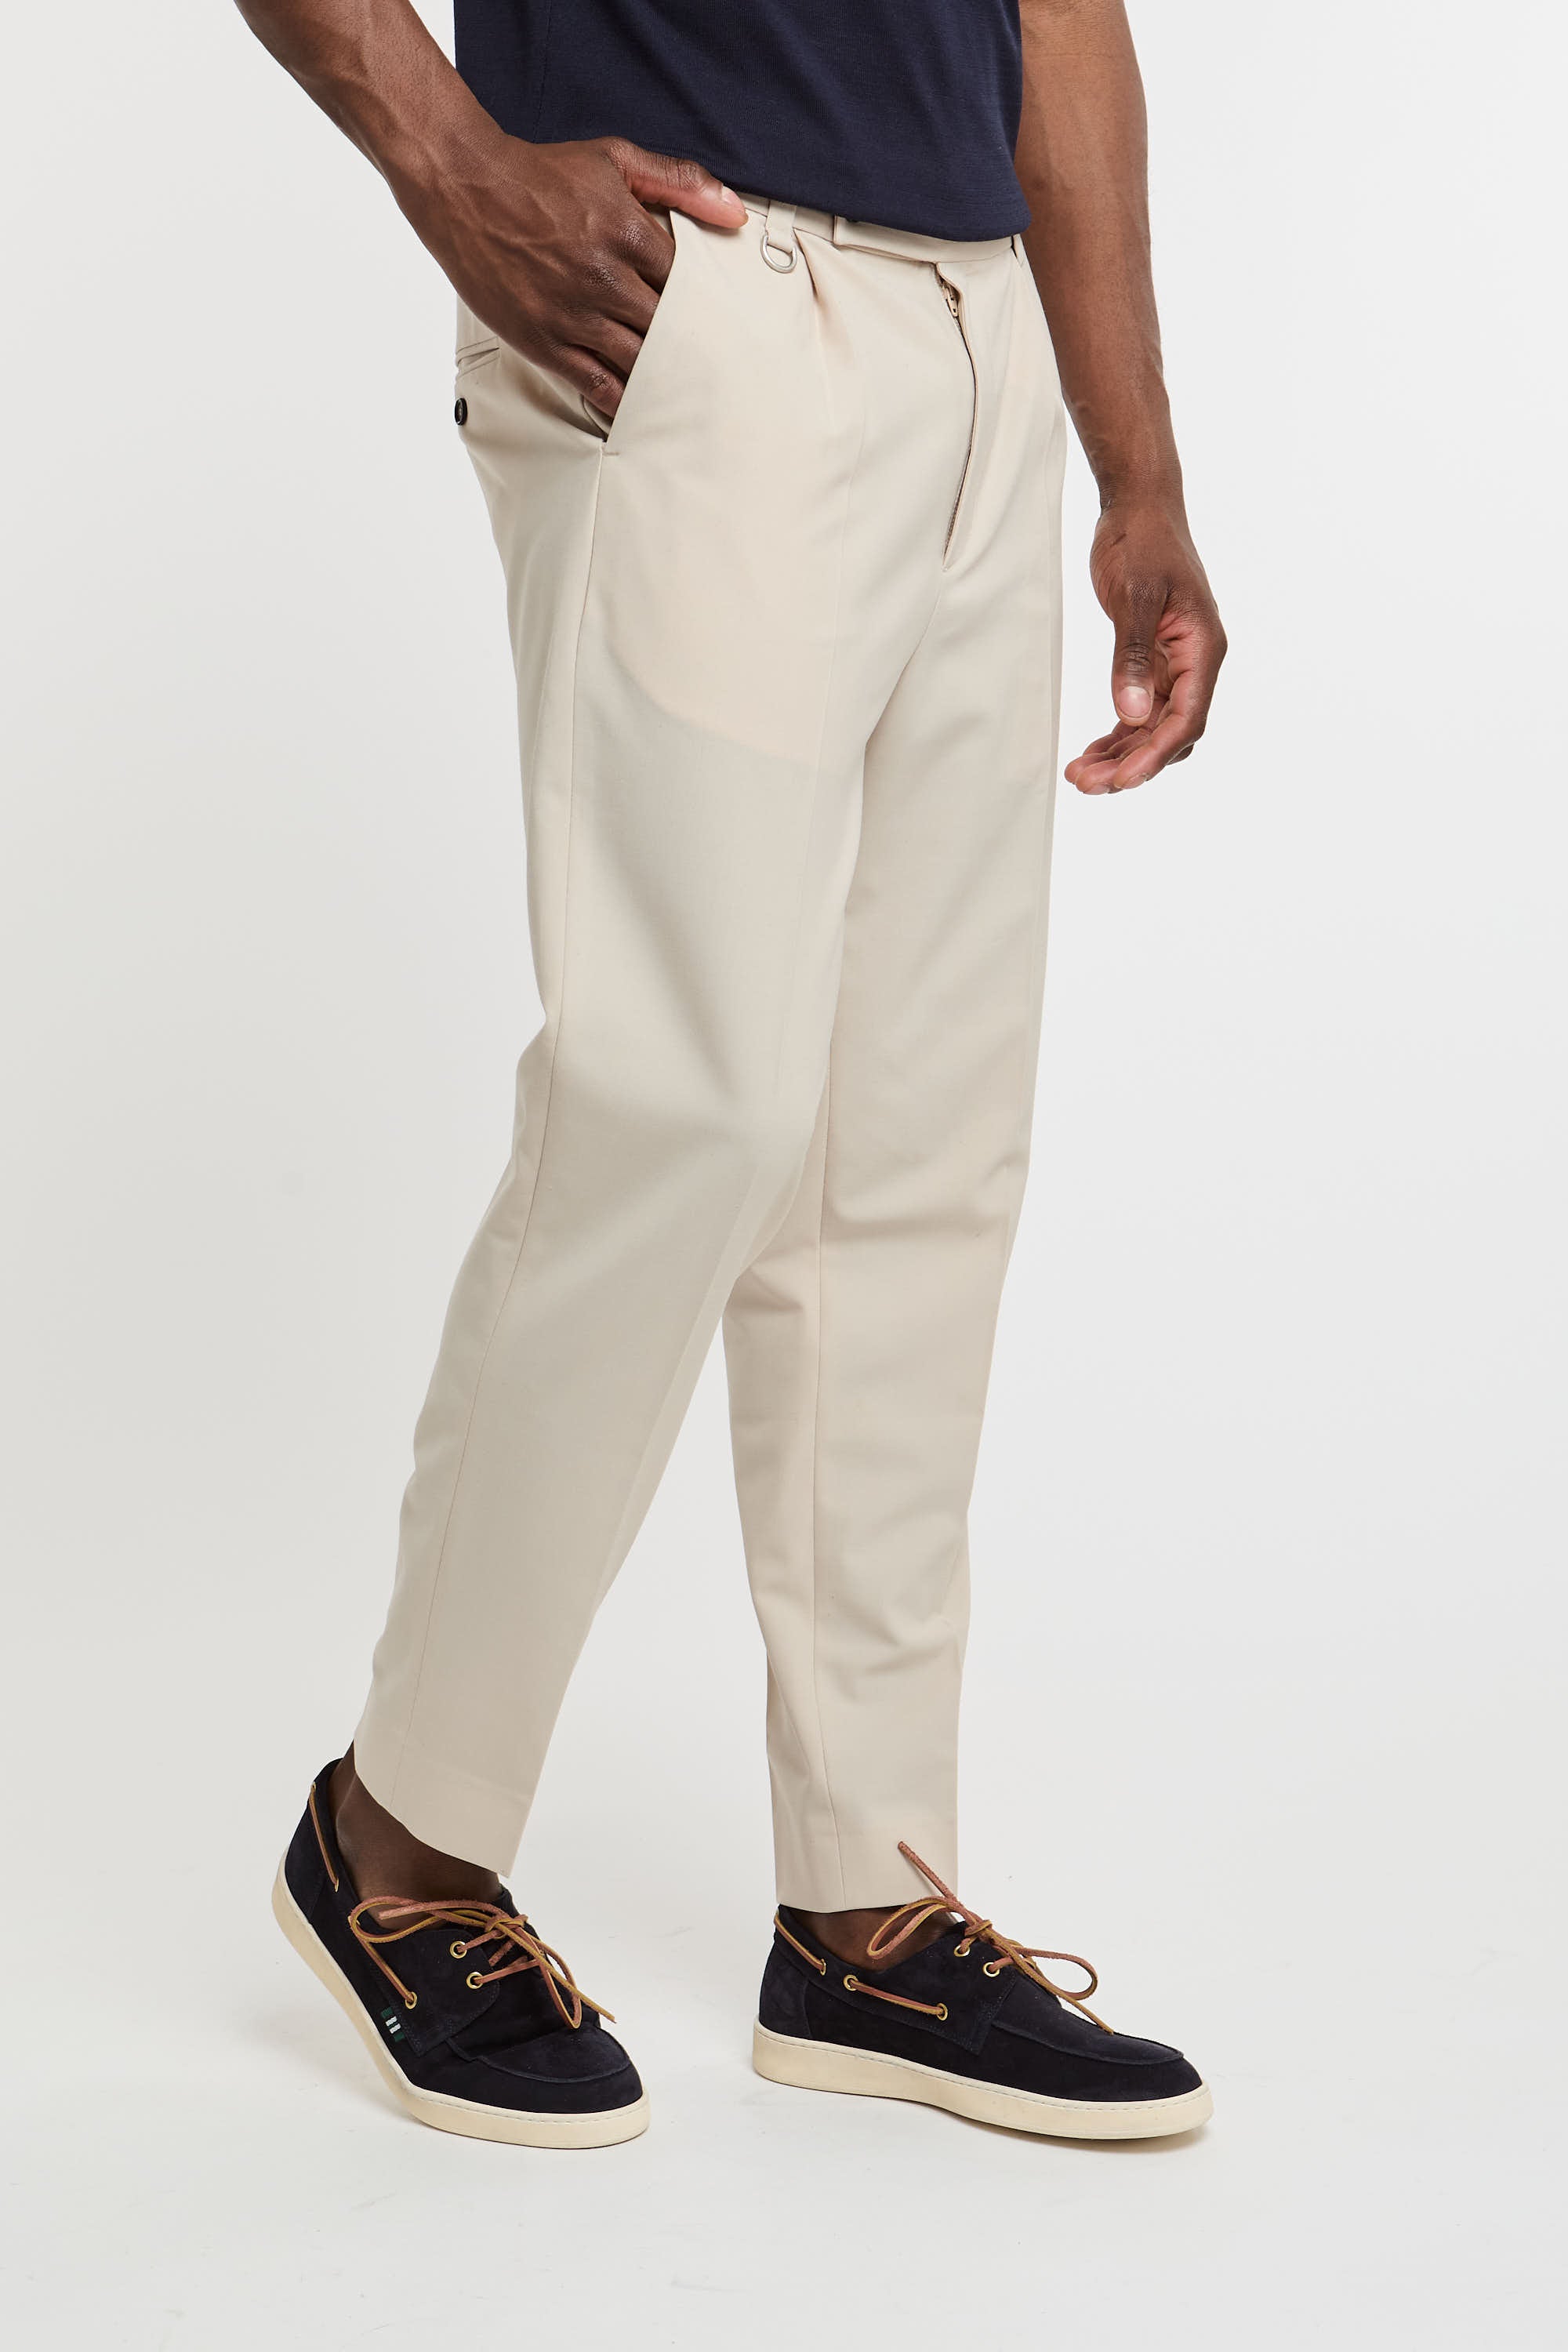 Paolo Pecora Beige Wool/Polyester Mix Trousers-3